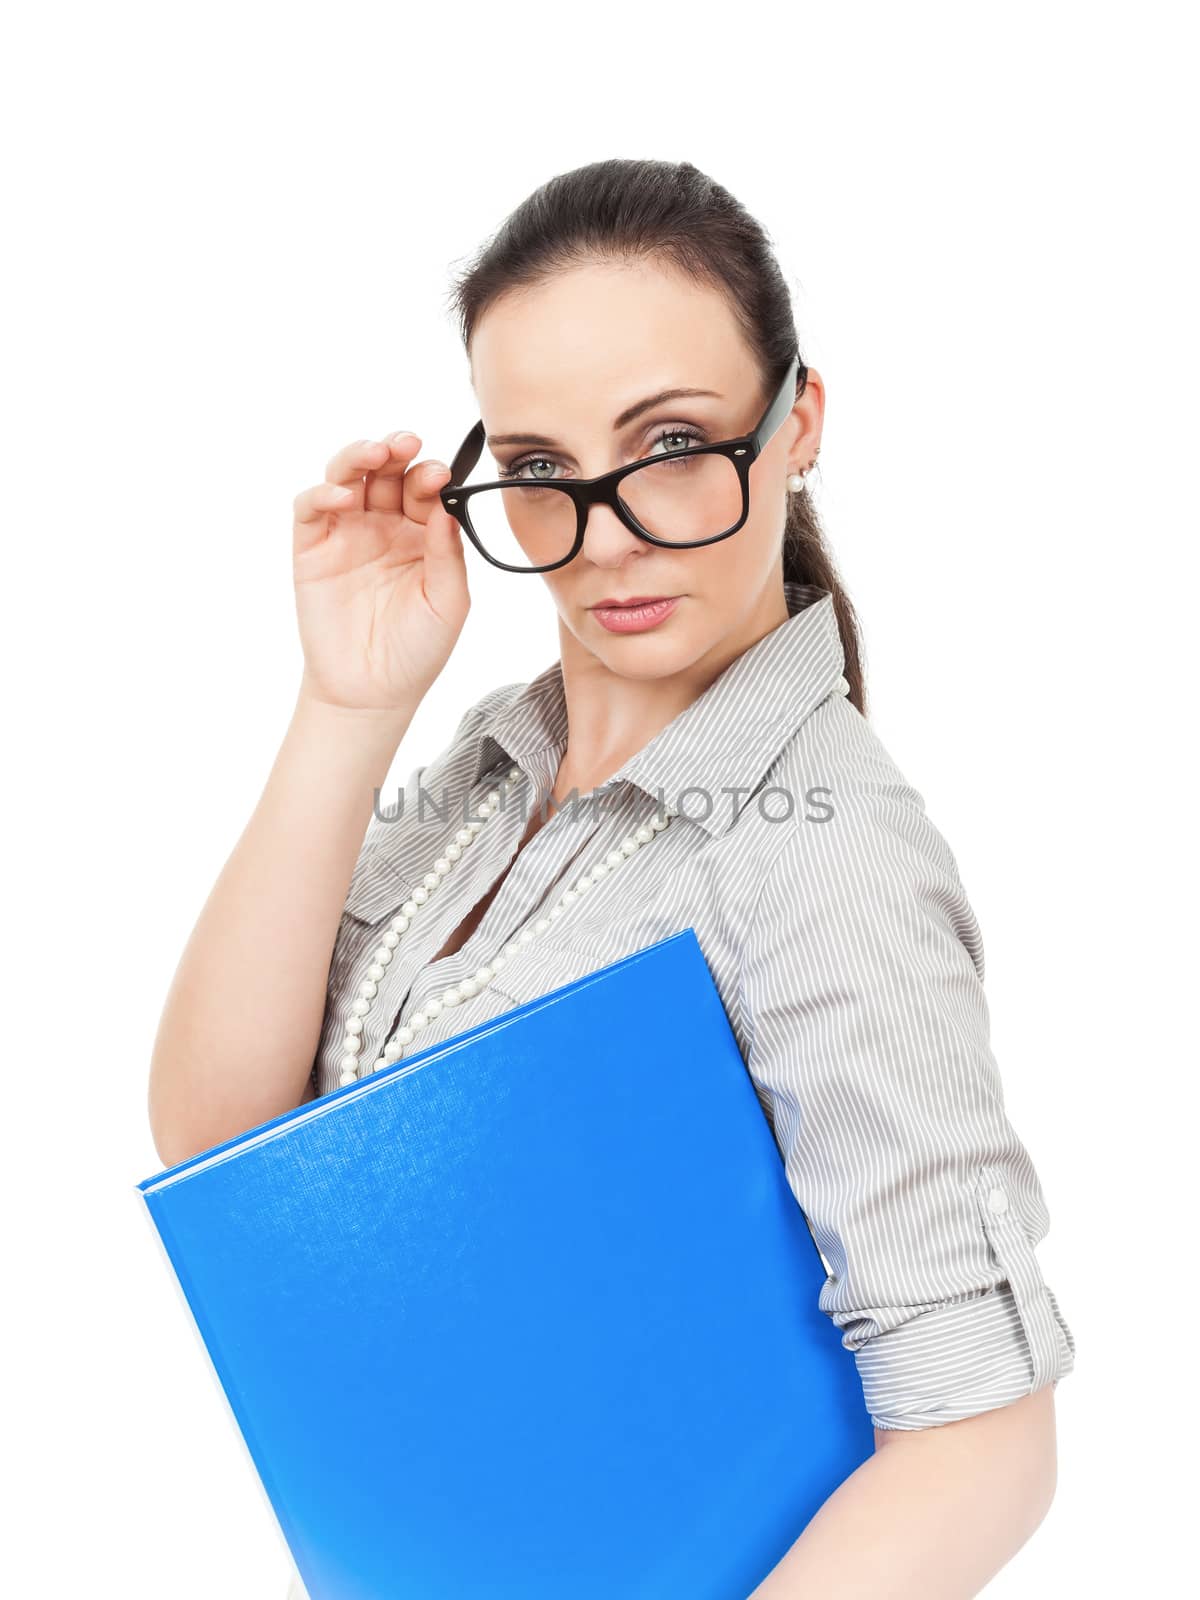 business woman with glasses by magann